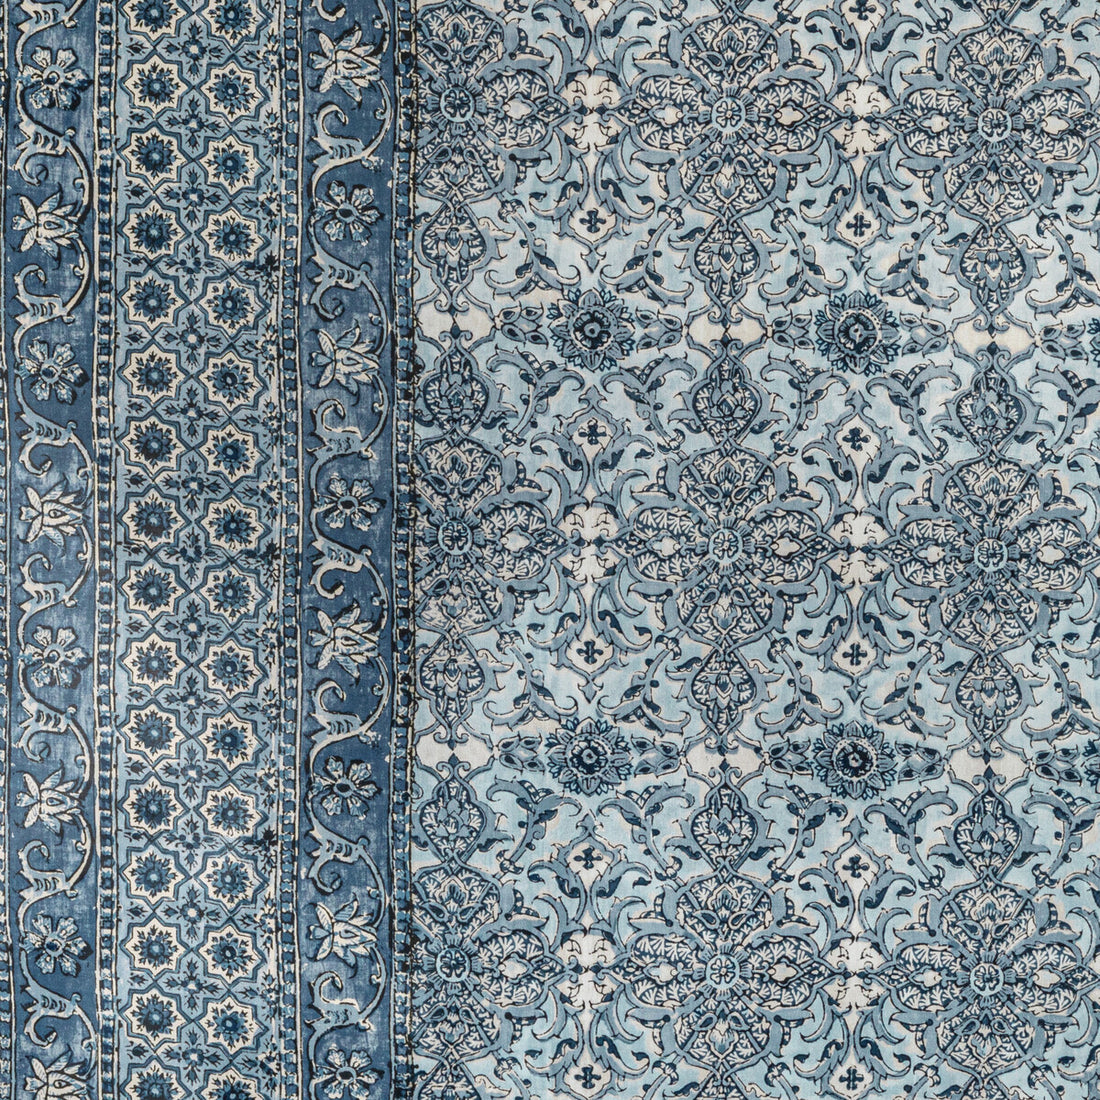 Palmer Print fabric in delft color - pattern 2022117.5.0 - by Lee Jofa in the Bunny Williams Arcadia collection